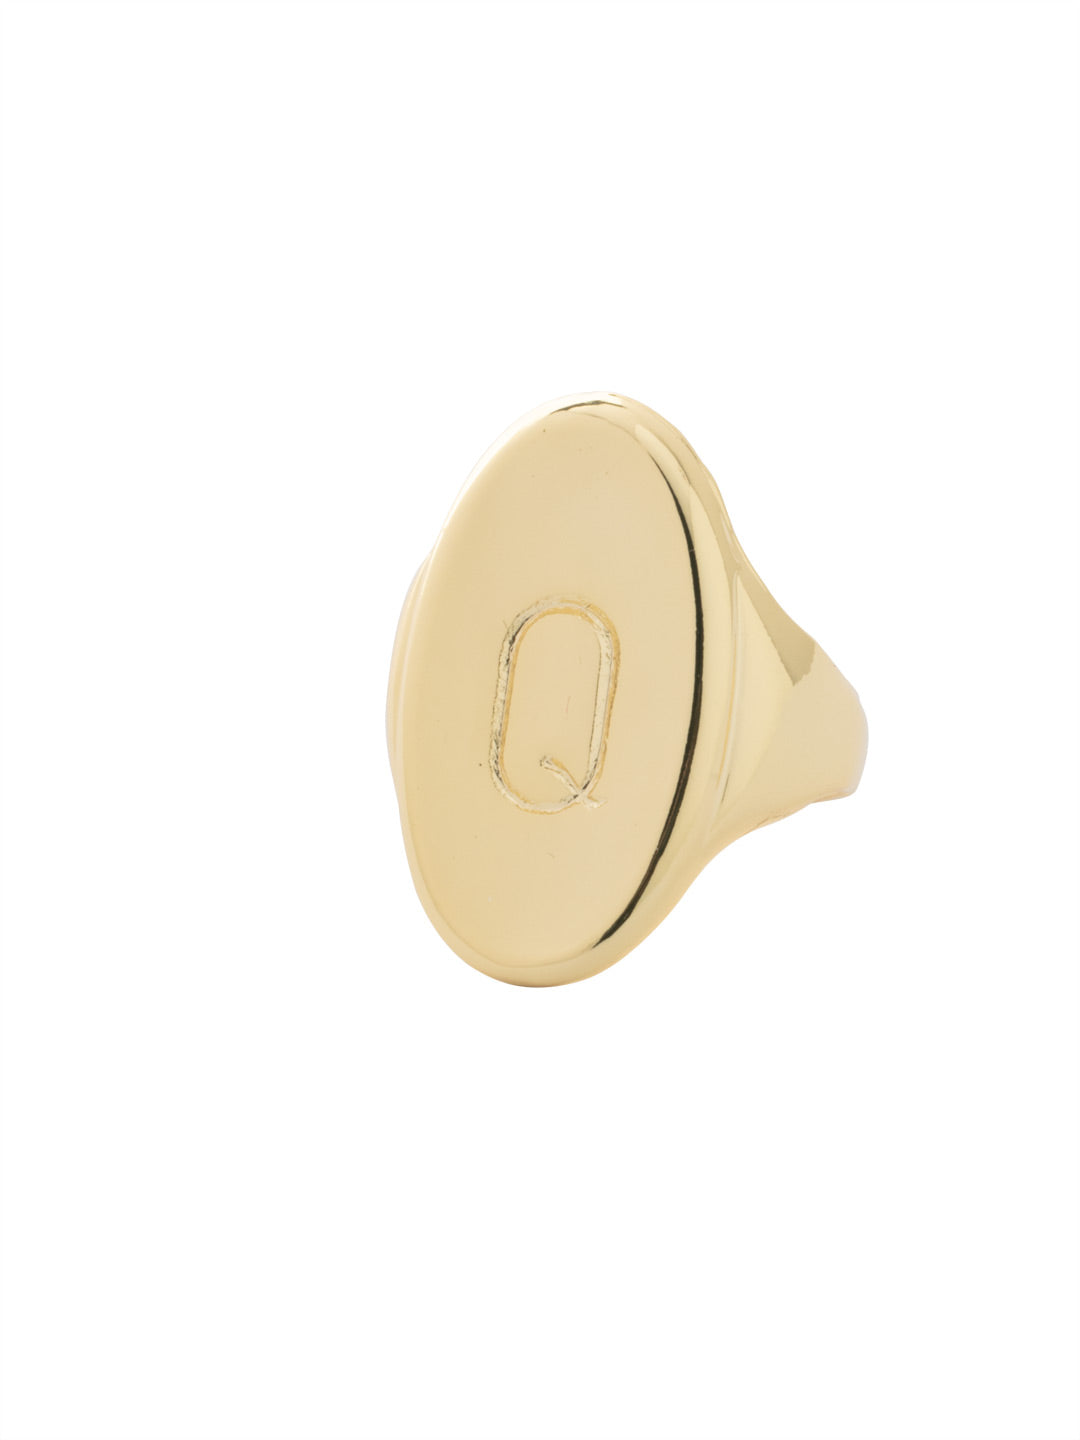 "Q" Signet Statement Ring - RFK46BGMTL - <p>The Signet Statement Ring features a capital letter stamped into an oblong metal disk on an adjustable ring band. From Sorrelli's Bare Metallic collection in our Bright Gold-tone finish.</p>